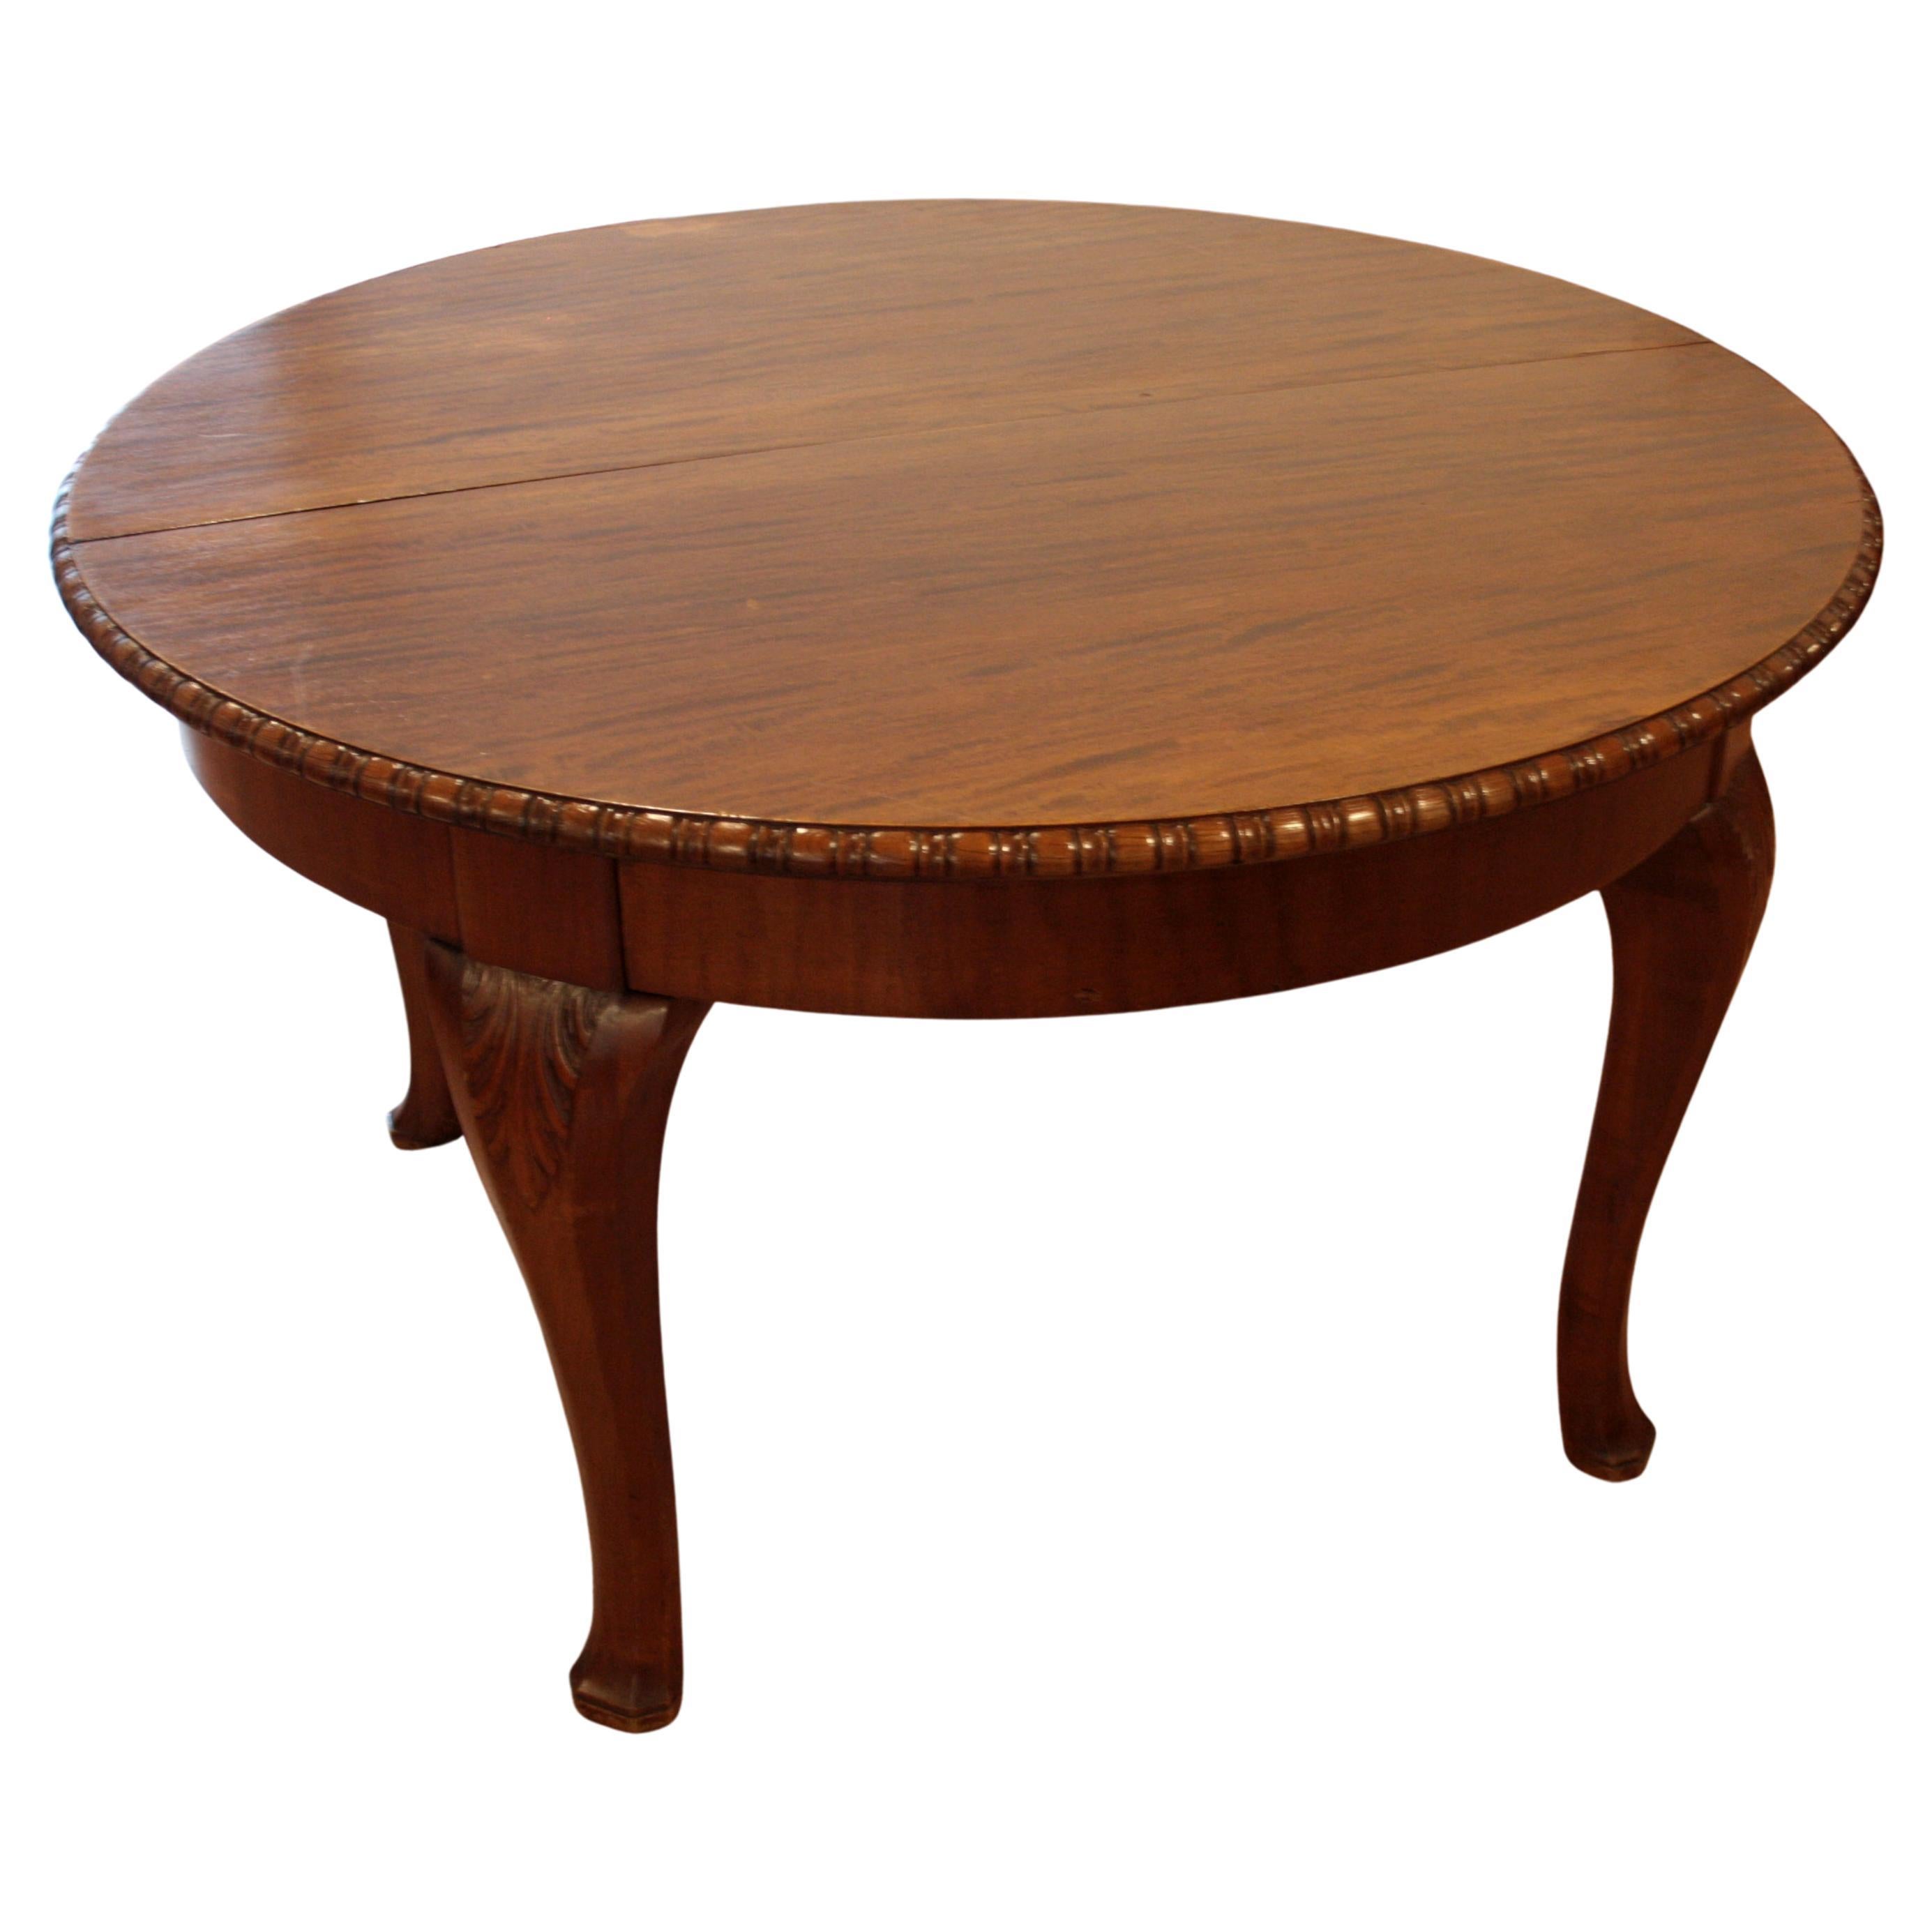 Vintage Oak Extendable Solid Table Classical Italian Quality 160 x 130 cm opened For Sale